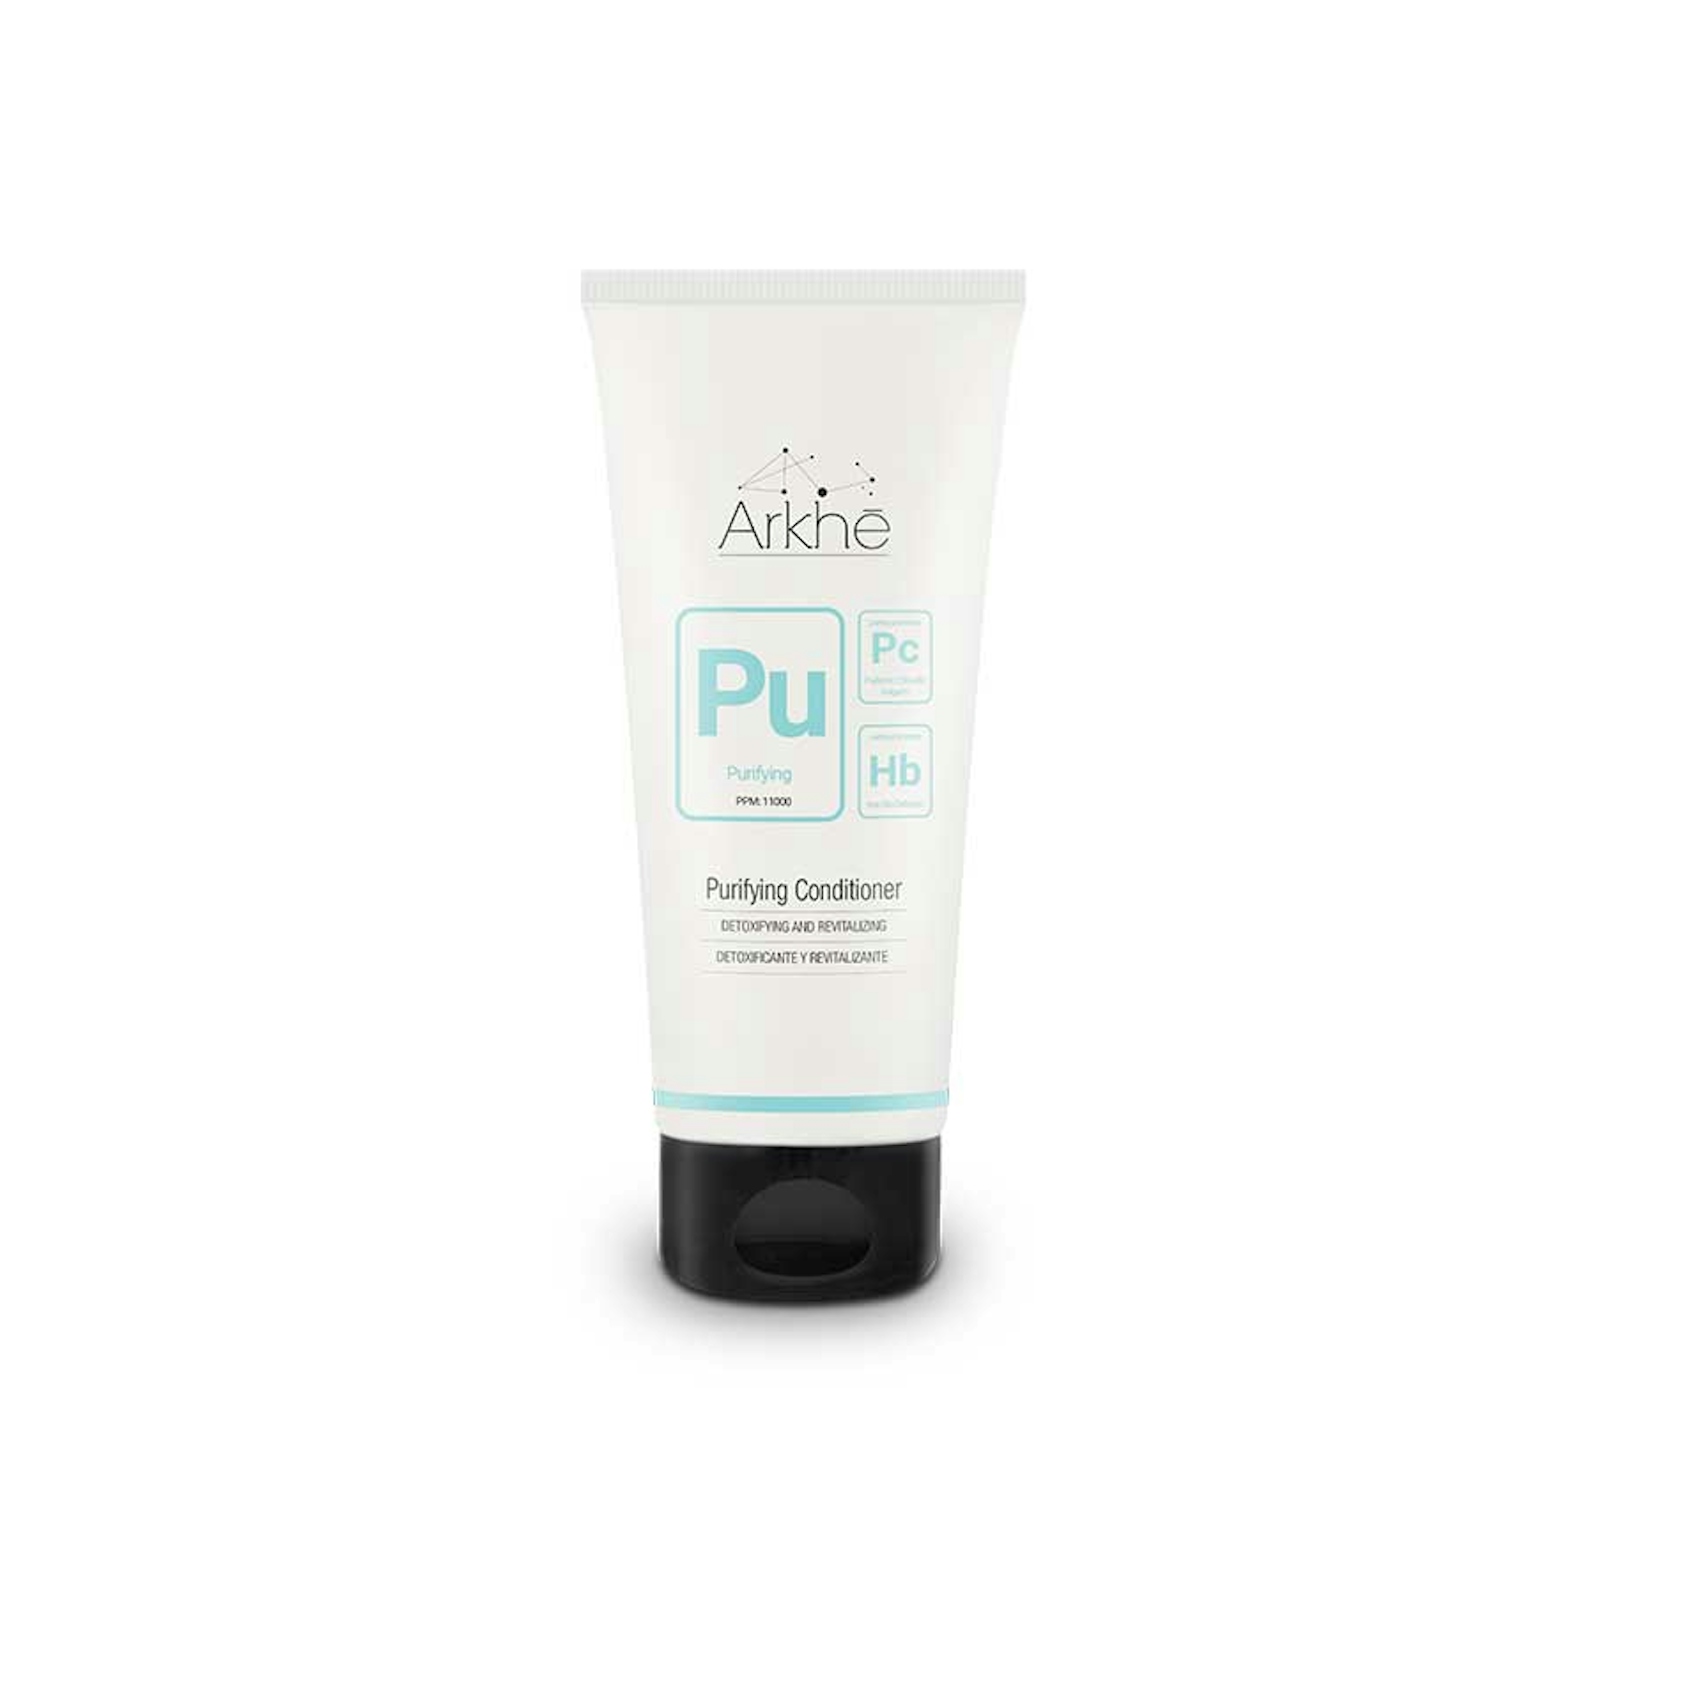 Muestra Purifying Conditioner 50ml